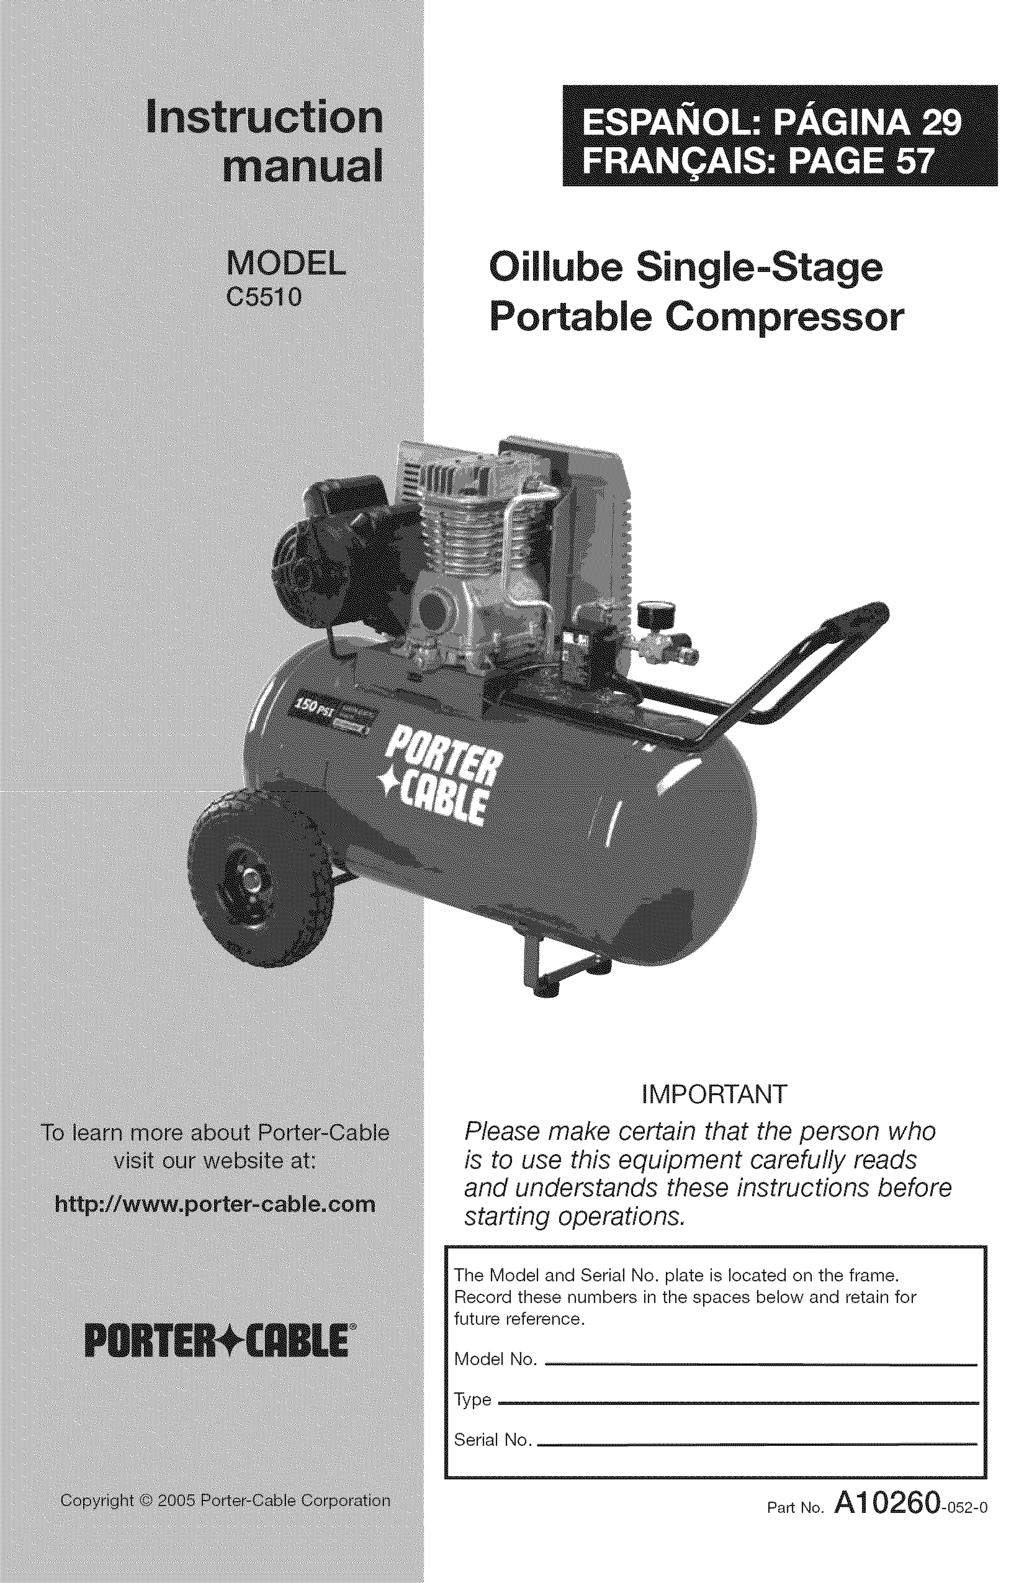 Oillube Single=Stage Portable Compressor IMPORTANT Please make certain that the person who is to use this equipment carefully reads and understands these instructions before starting